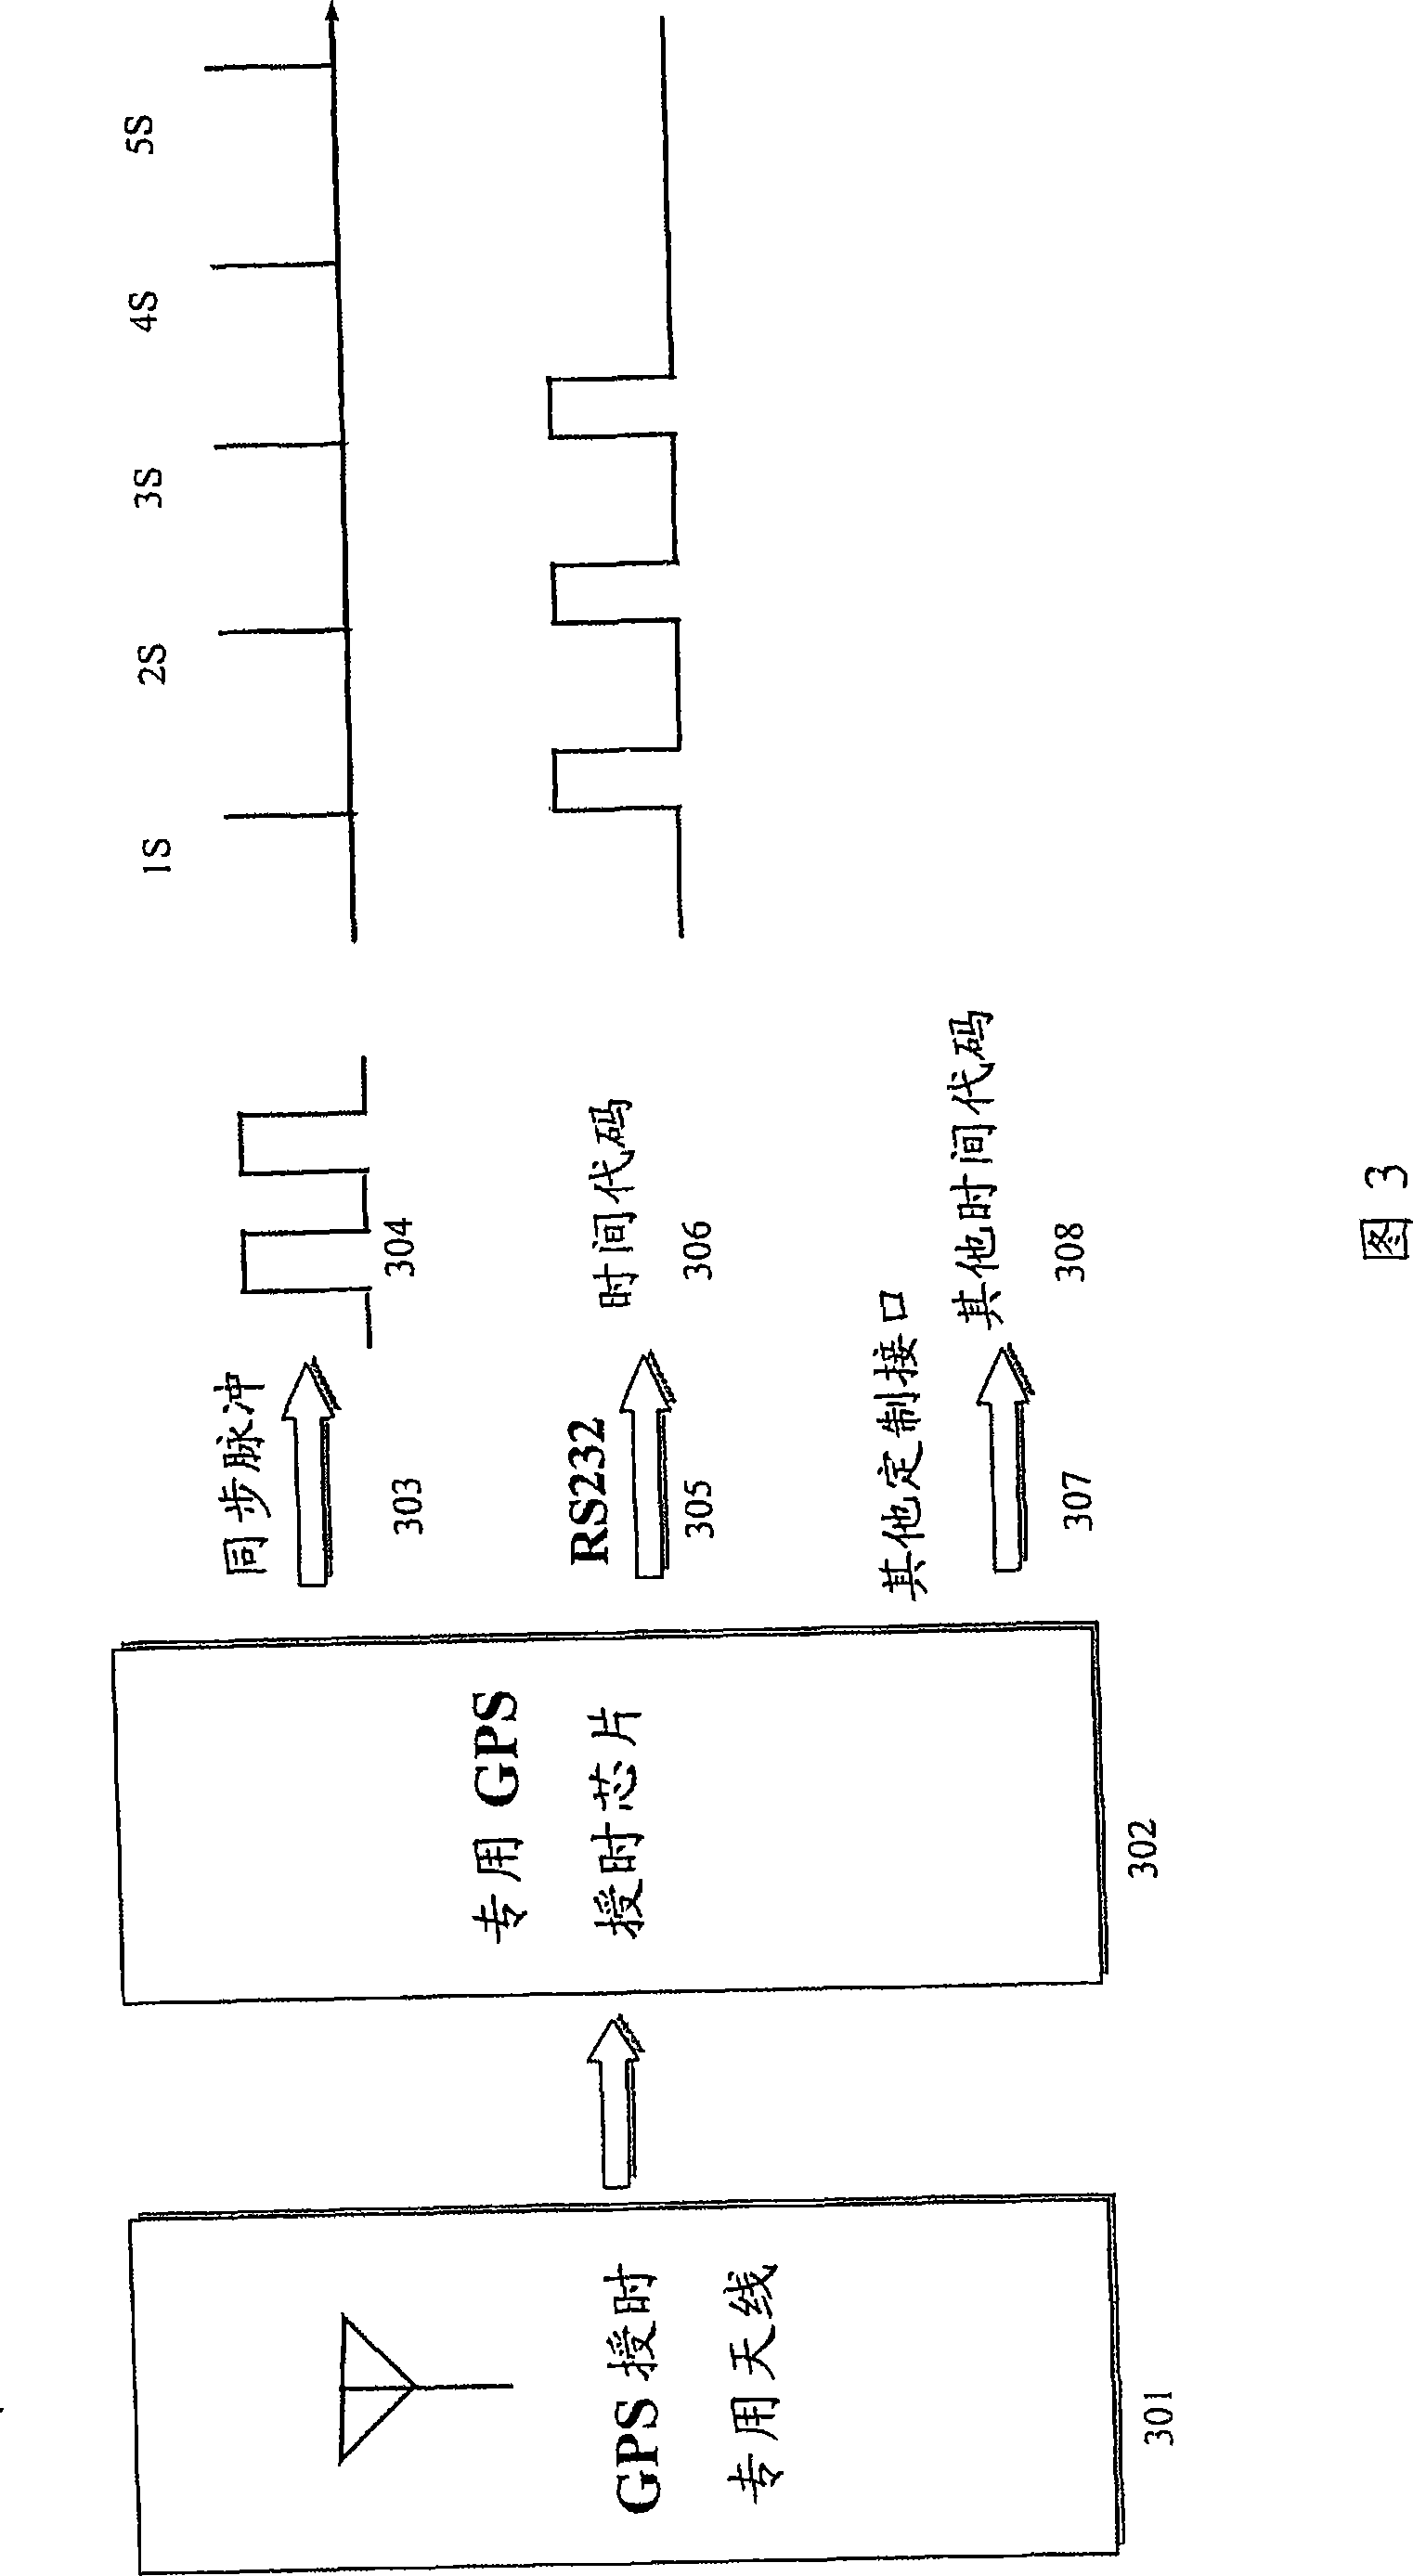 Low-cost time service and synchronization method and equipment for global positioning system receiver